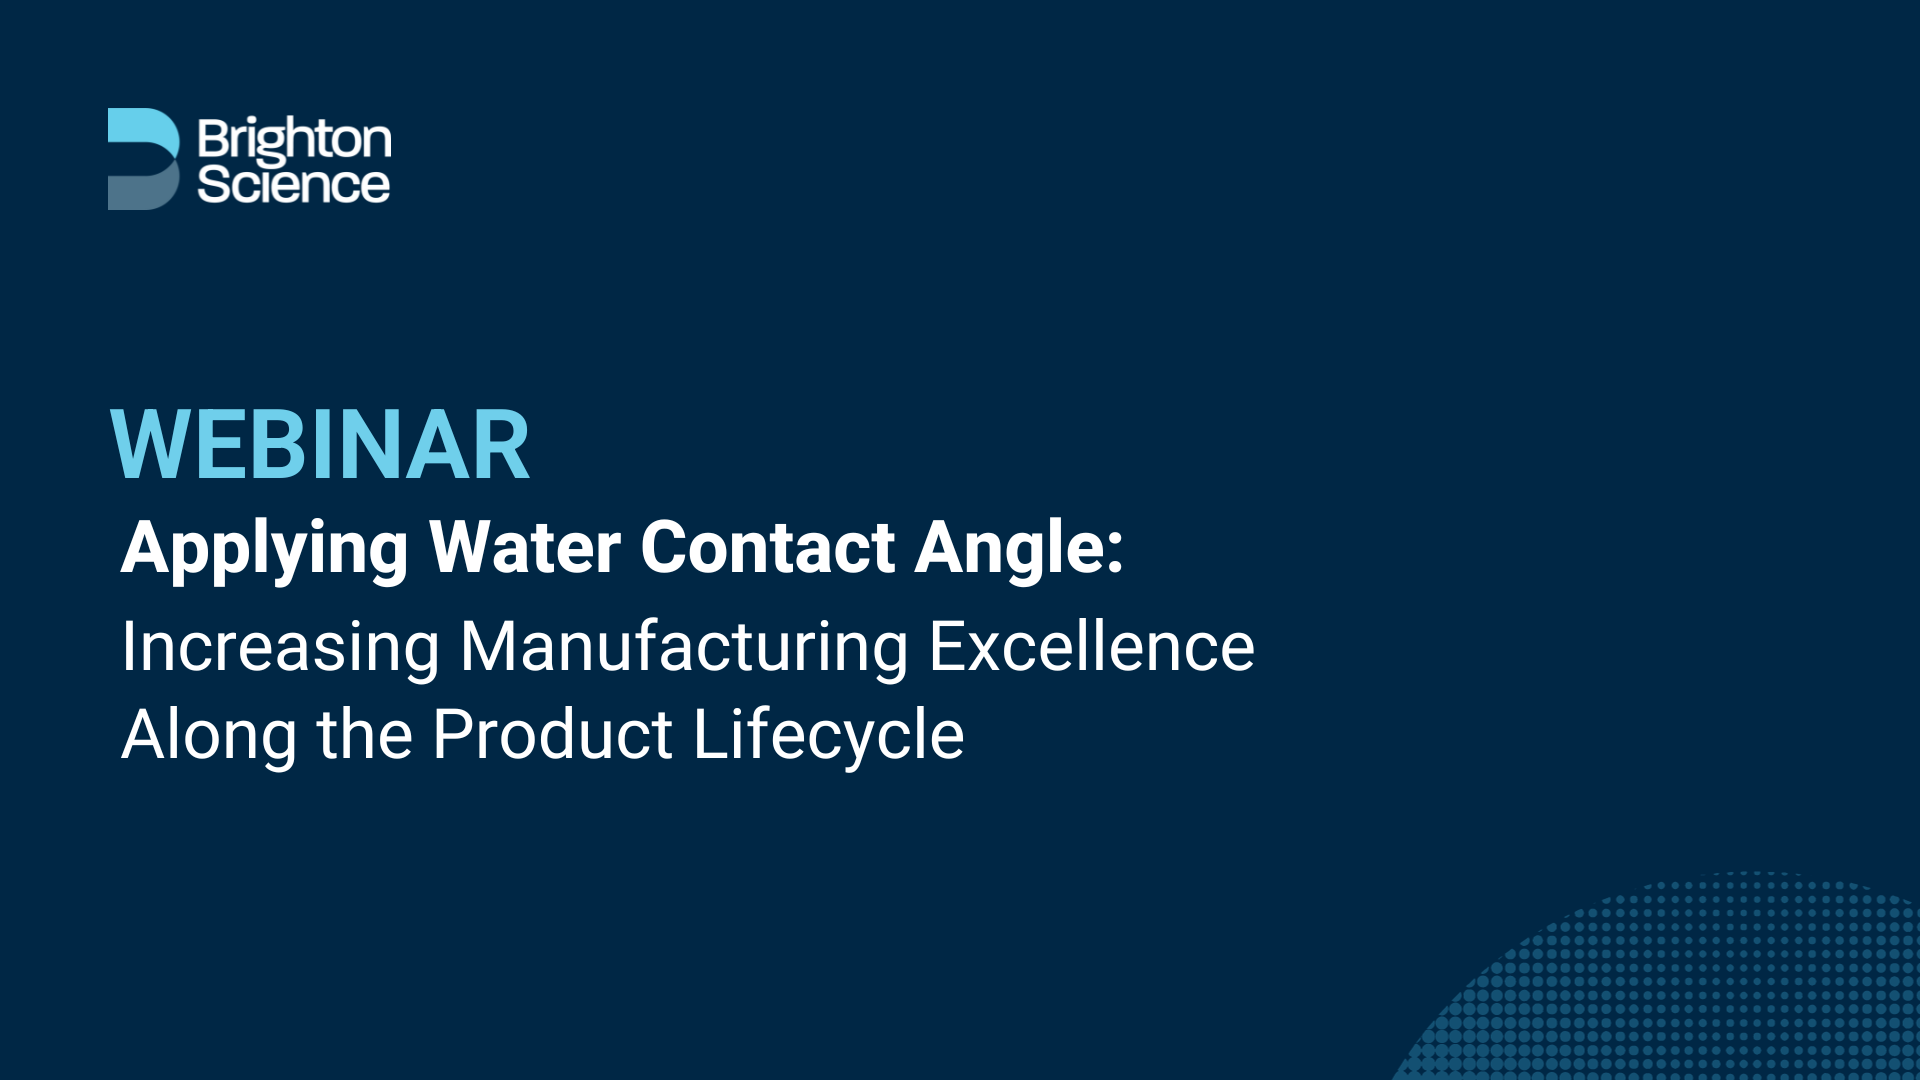 Webinar: Applying Water Contact Angle: Increasing Manufacturing Excellence Along the Product Lifecycle